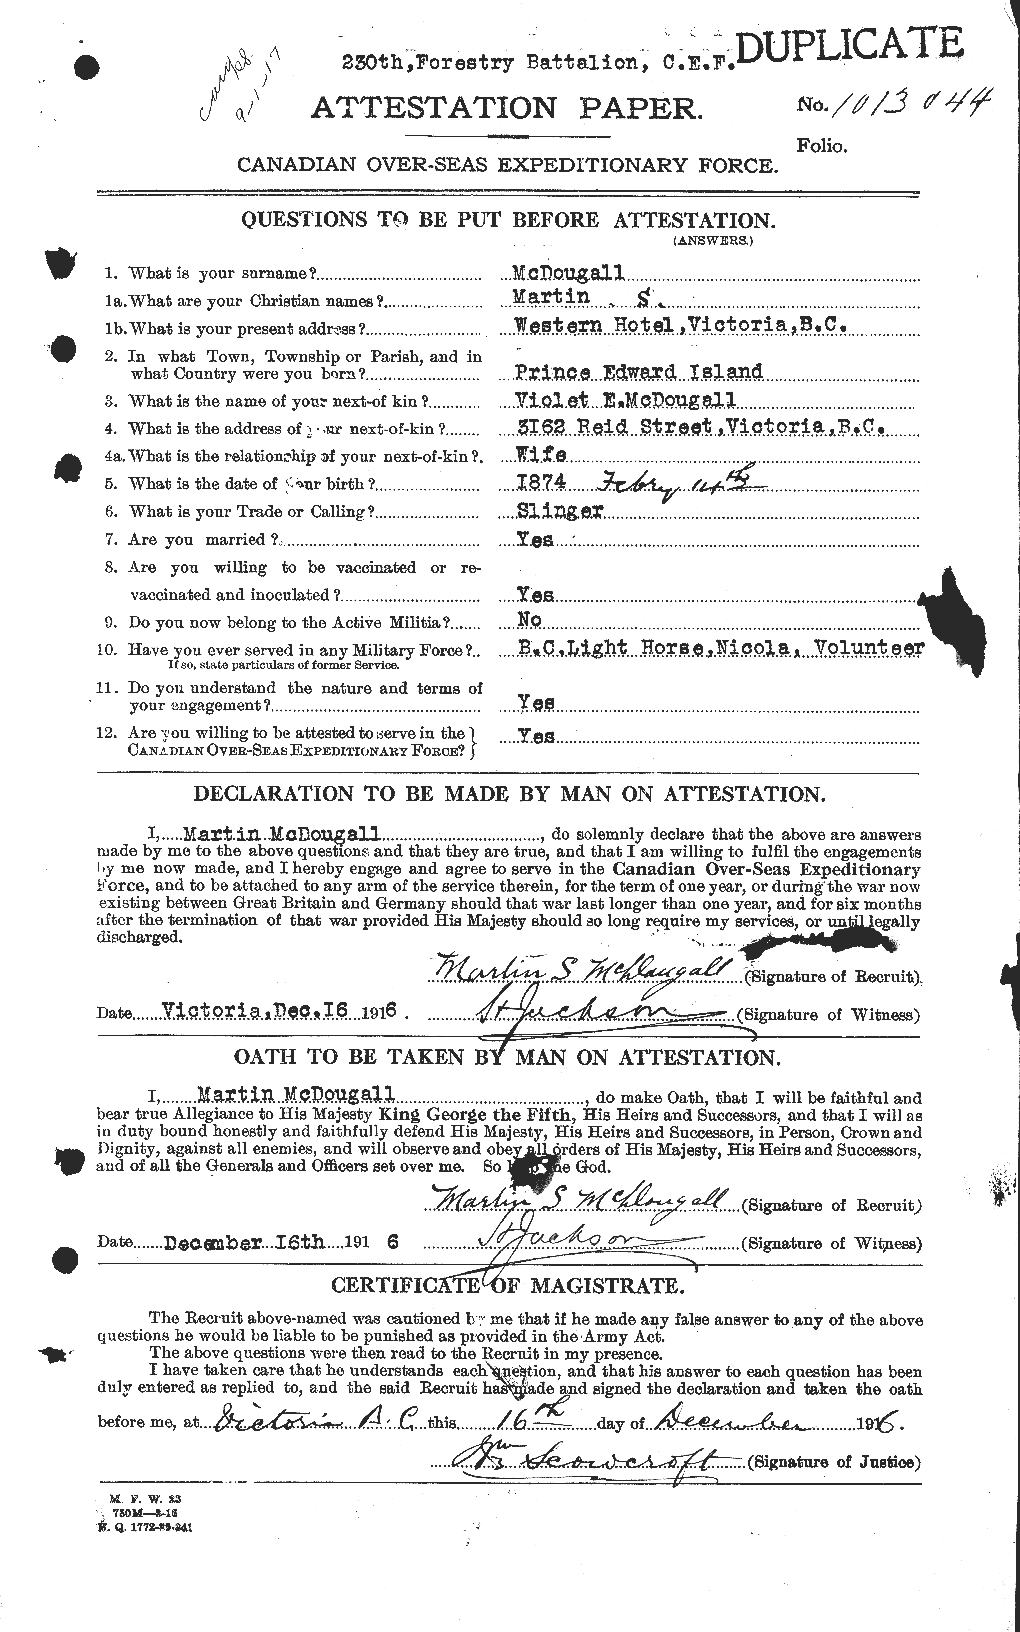 Personnel Records of the First World War - CEF 518319a